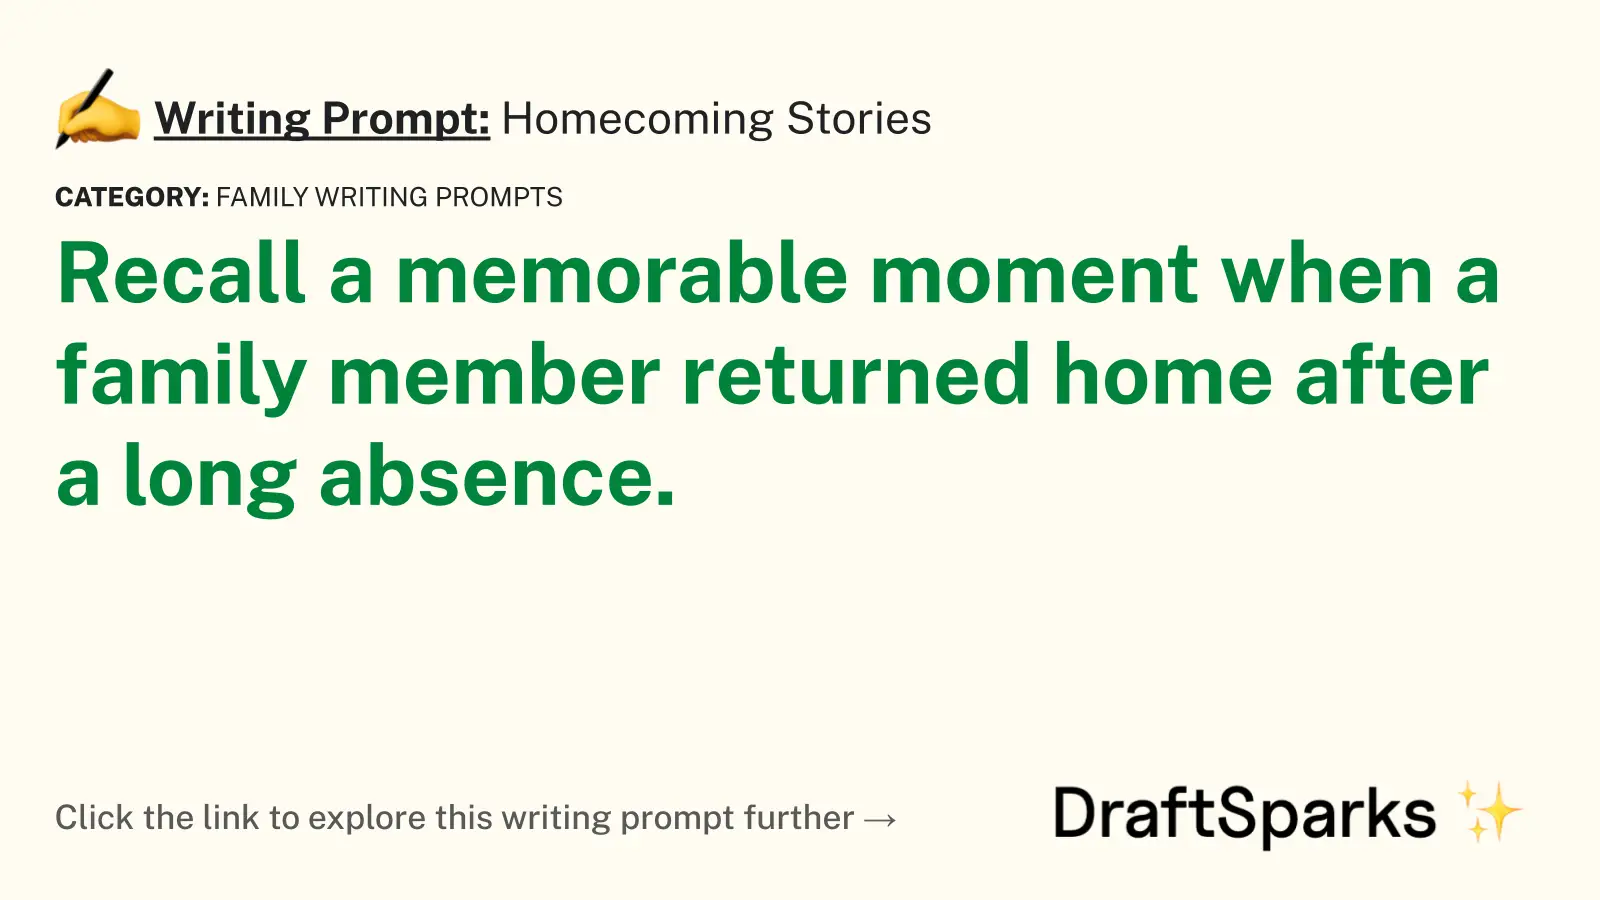 Homecoming Stories